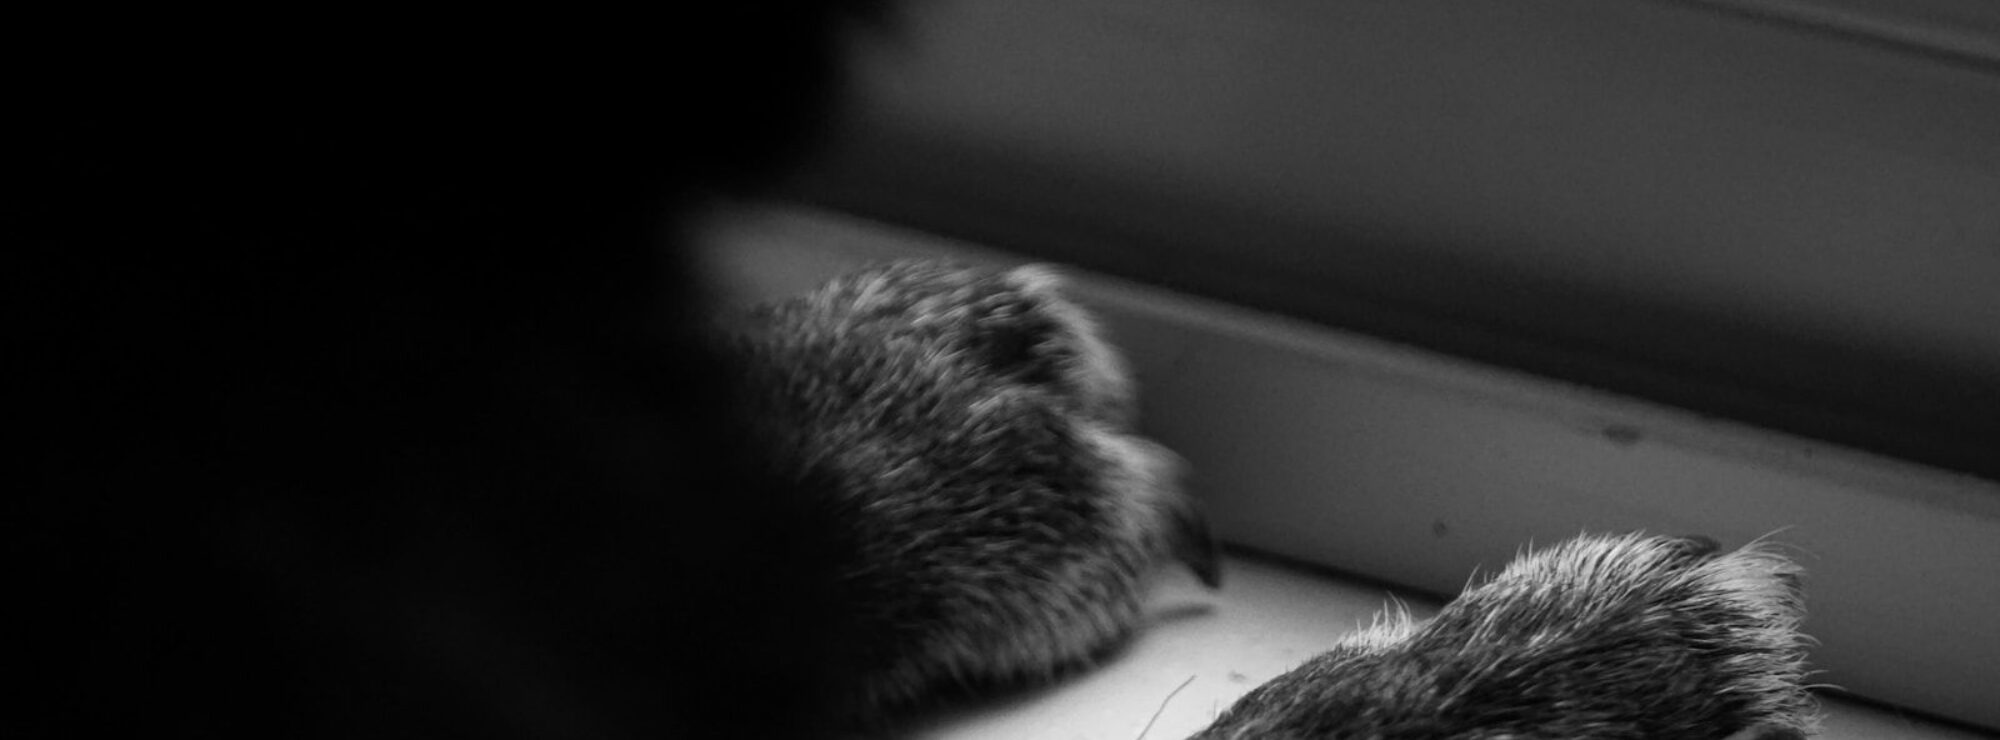 a close up of a cat's paw on a window sill